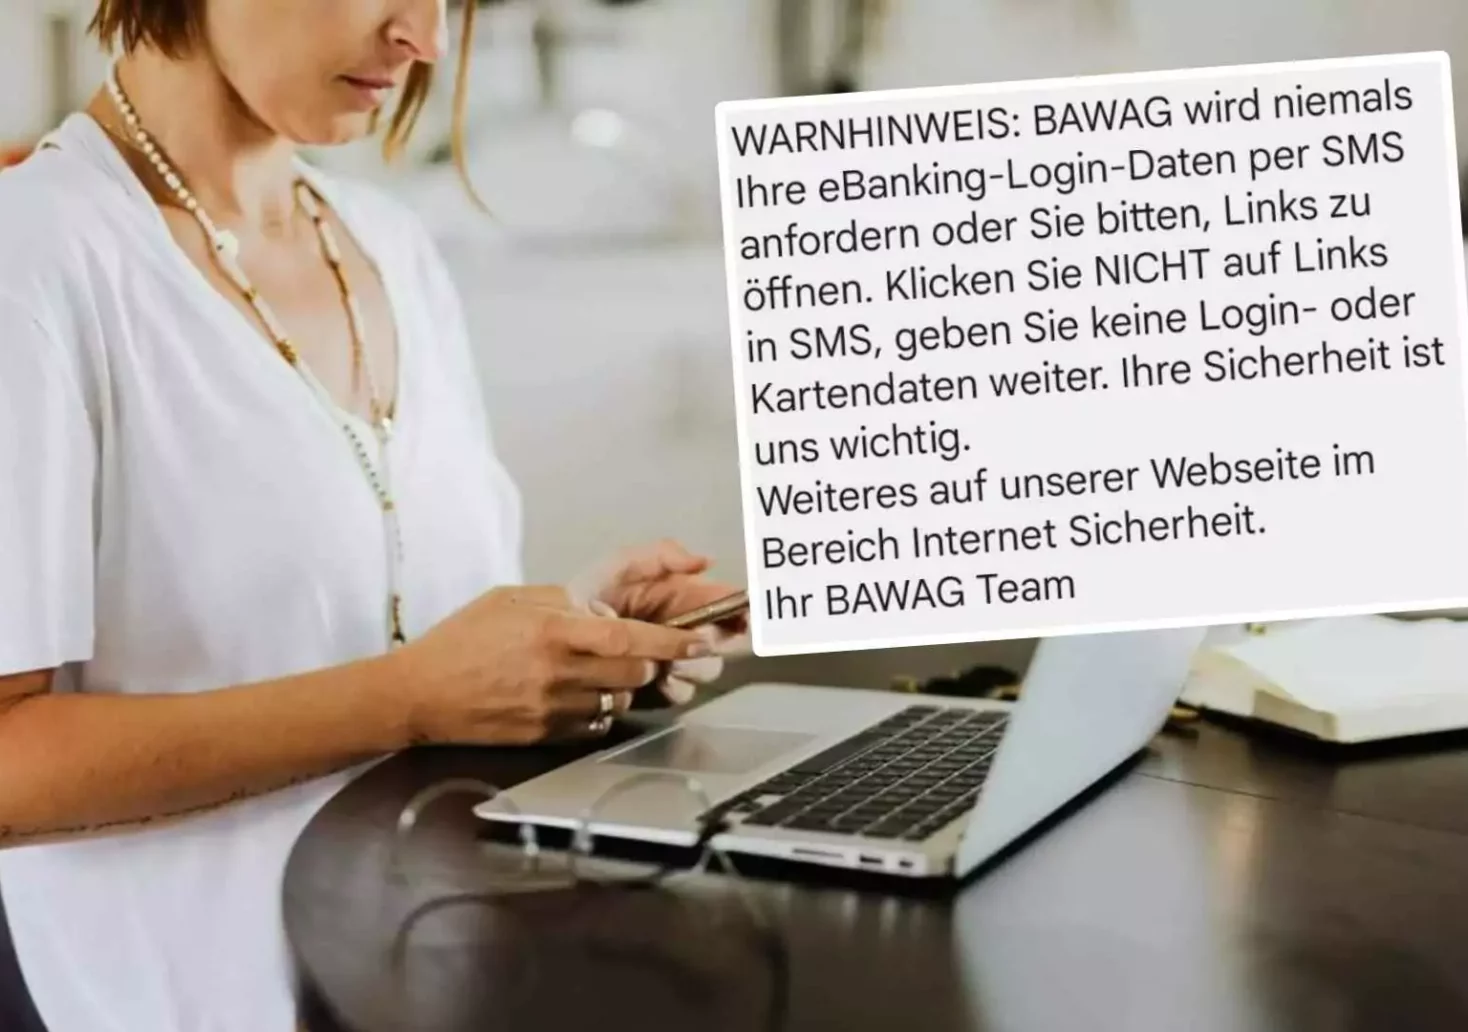 Photo in article by 5min.at: You can see BAWAG SMS warning from scammers and a woman holding a cell phone in her hand and sitting in front of a laptop.